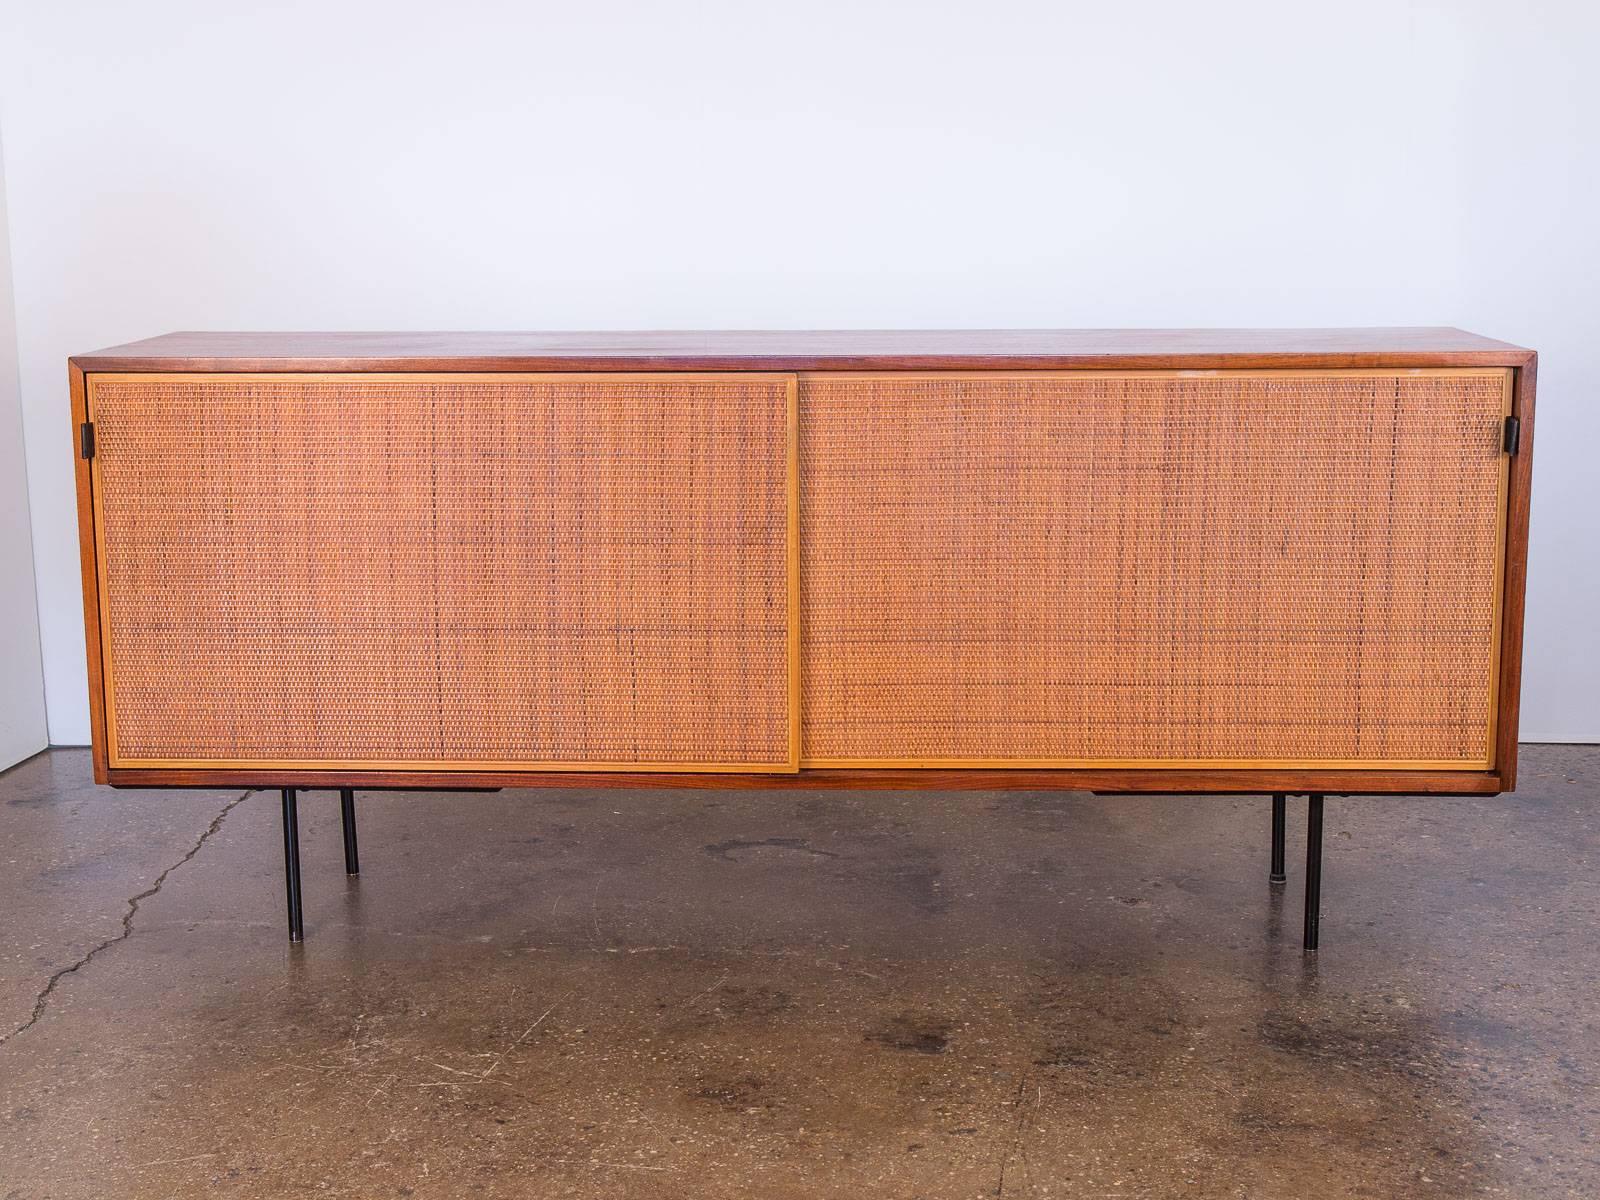 Scarce example of Florence Knoll’s walnut and woven cane door credenza. As seen in the Knoll Associates catalogue published in 1950, model 116. This early design adorns a gorgeous, natural walnut wood selection and features four sections with seven